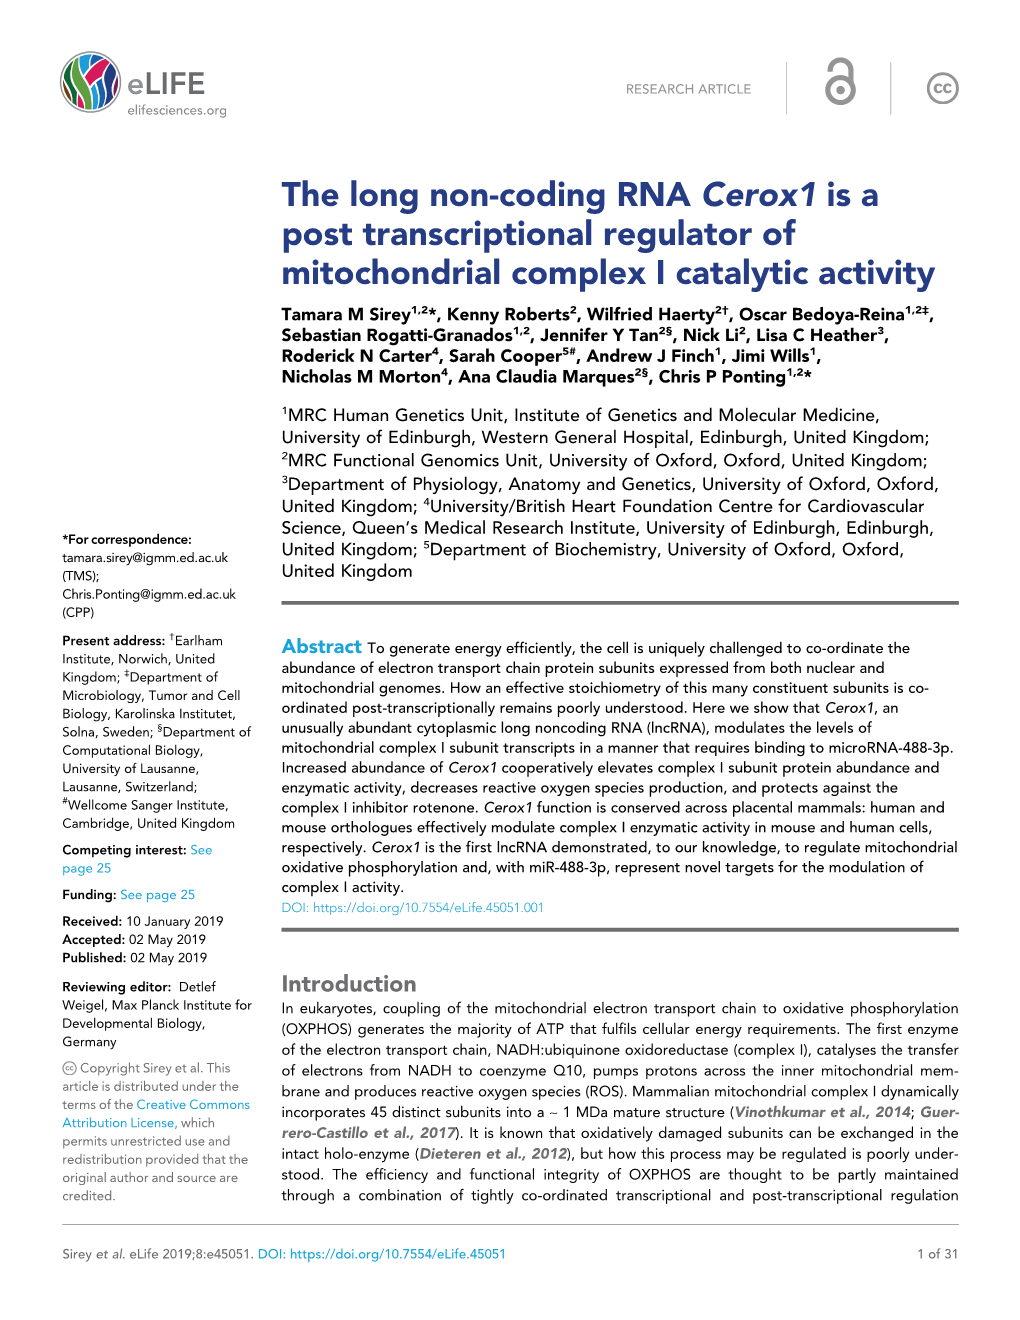 The Long Non-Coding RNA Cerox1 Is a Post Transcriptional Regulator Of